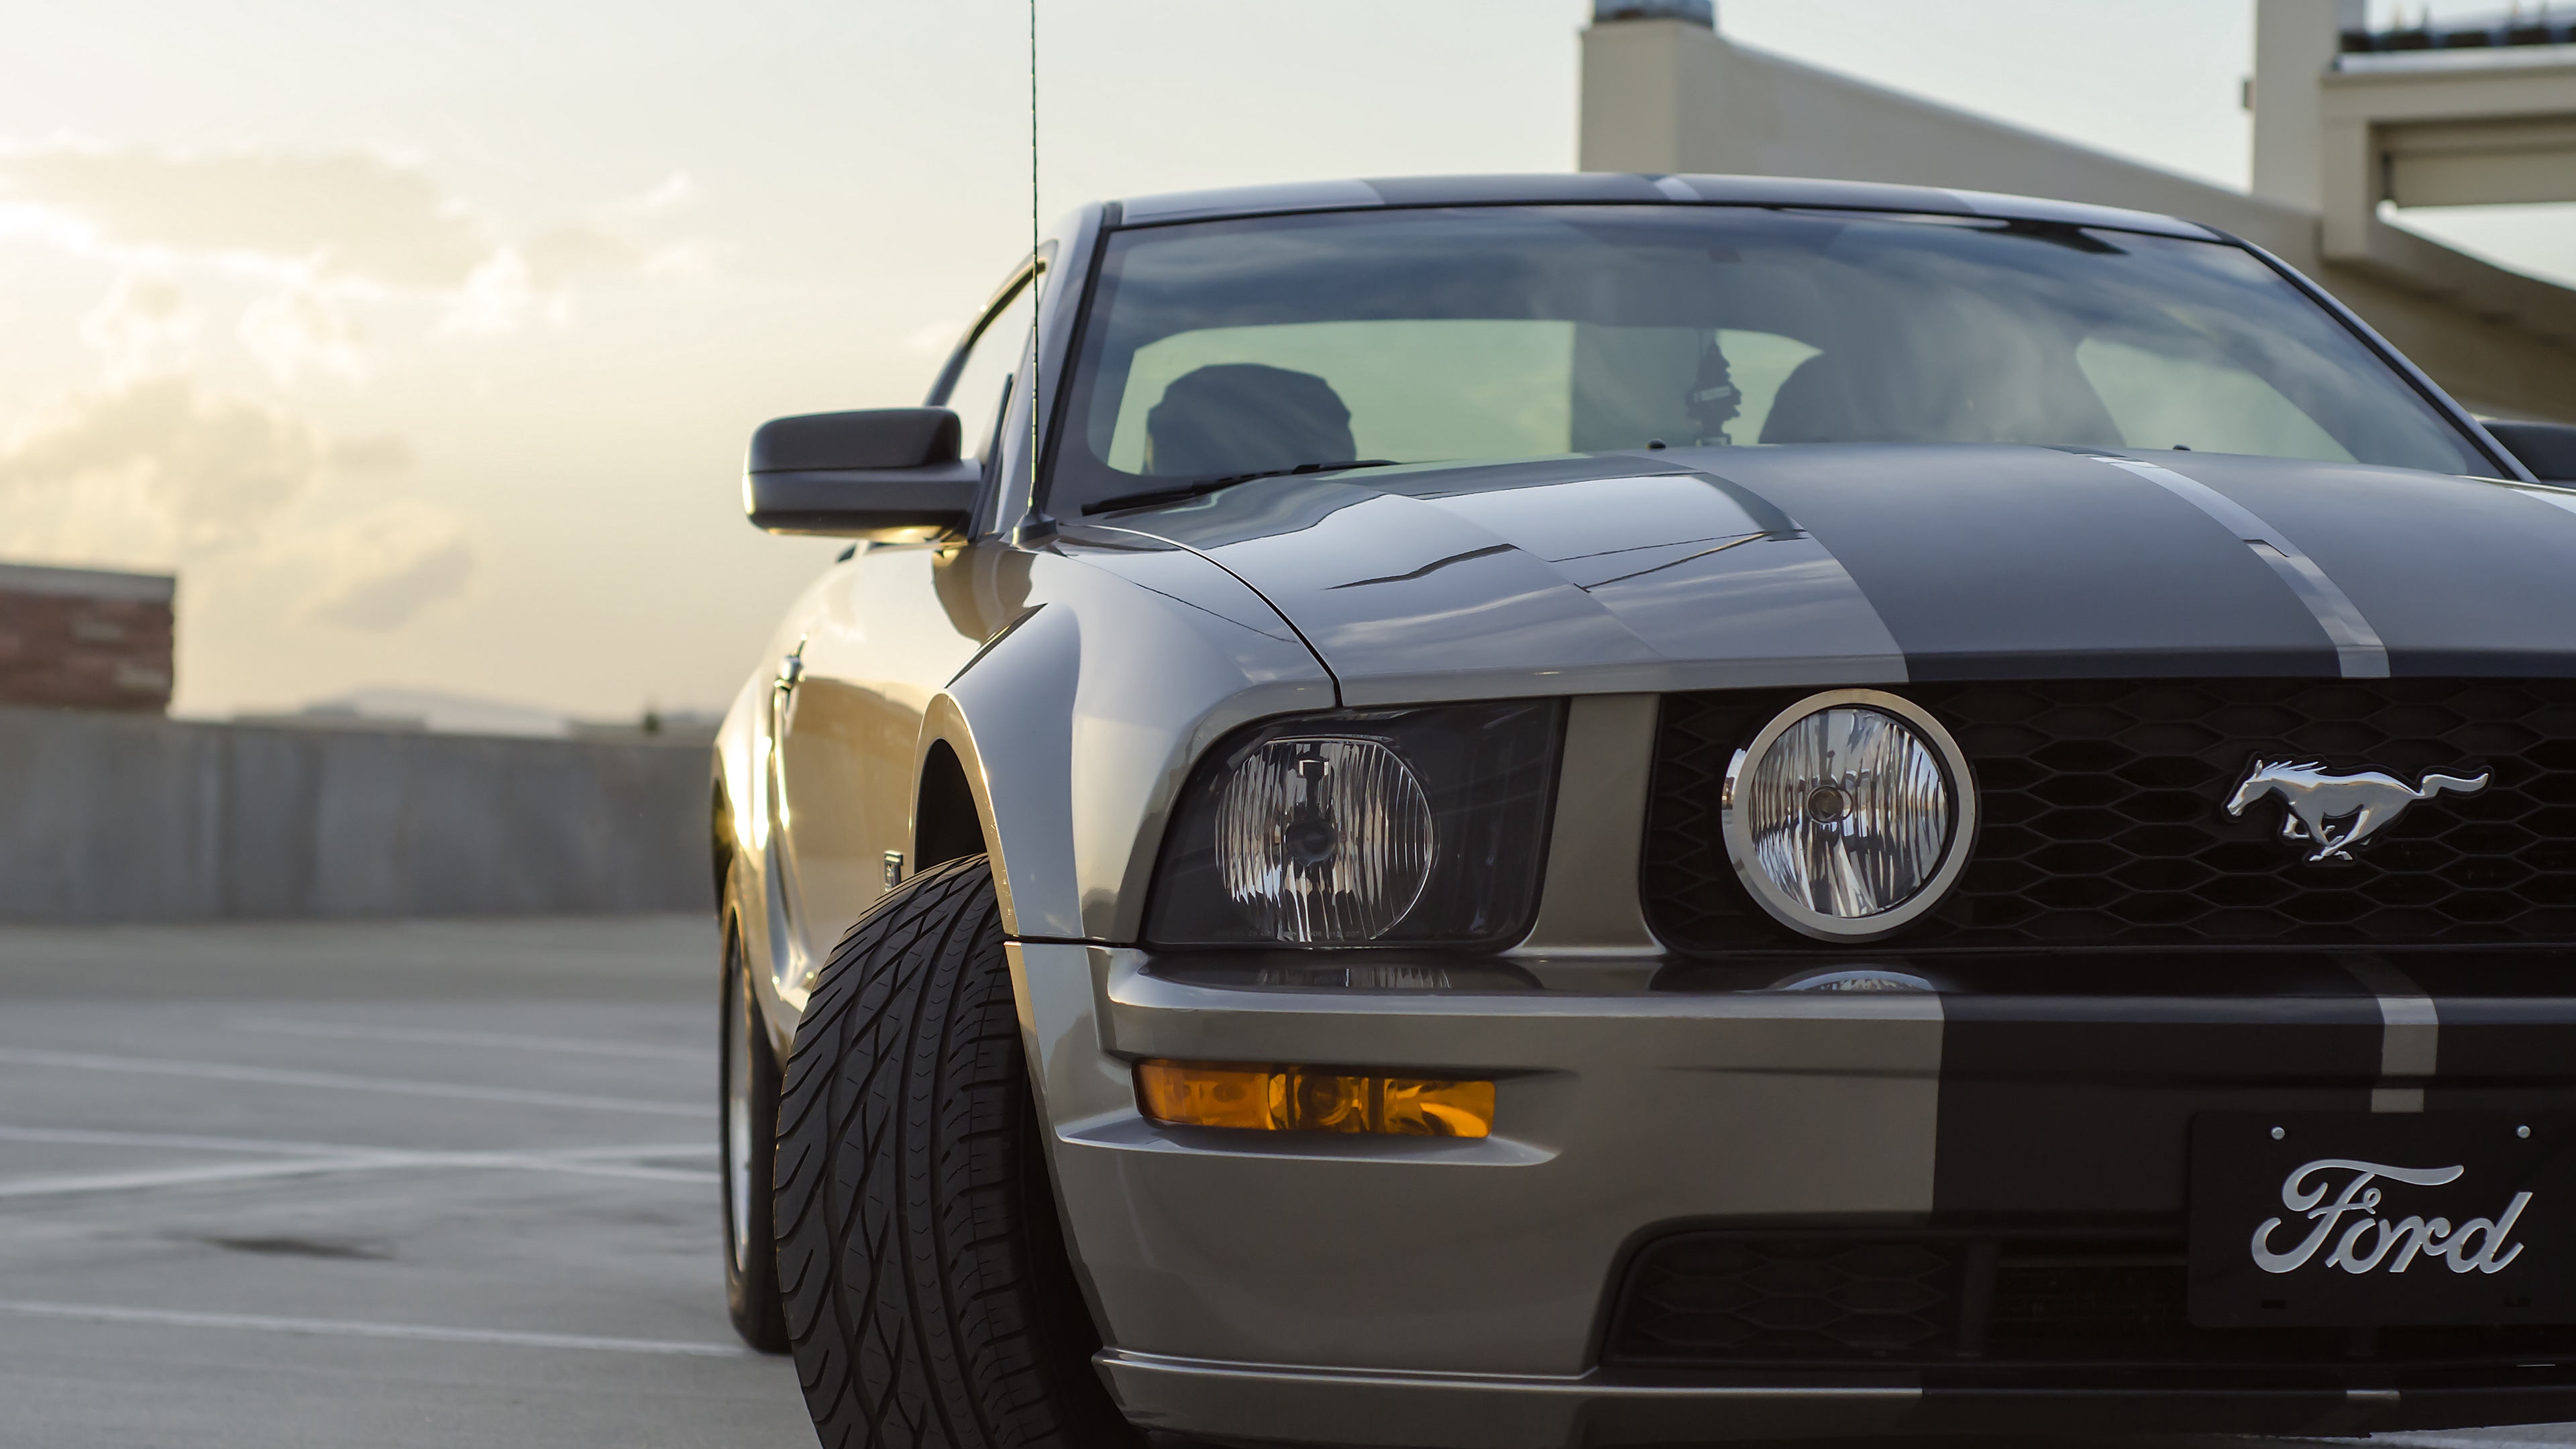 Wallpaper Ford Mustang Gt, Ford, Headlight, Front View - Ford Mustang Gt Hd - HD Wallpaper 